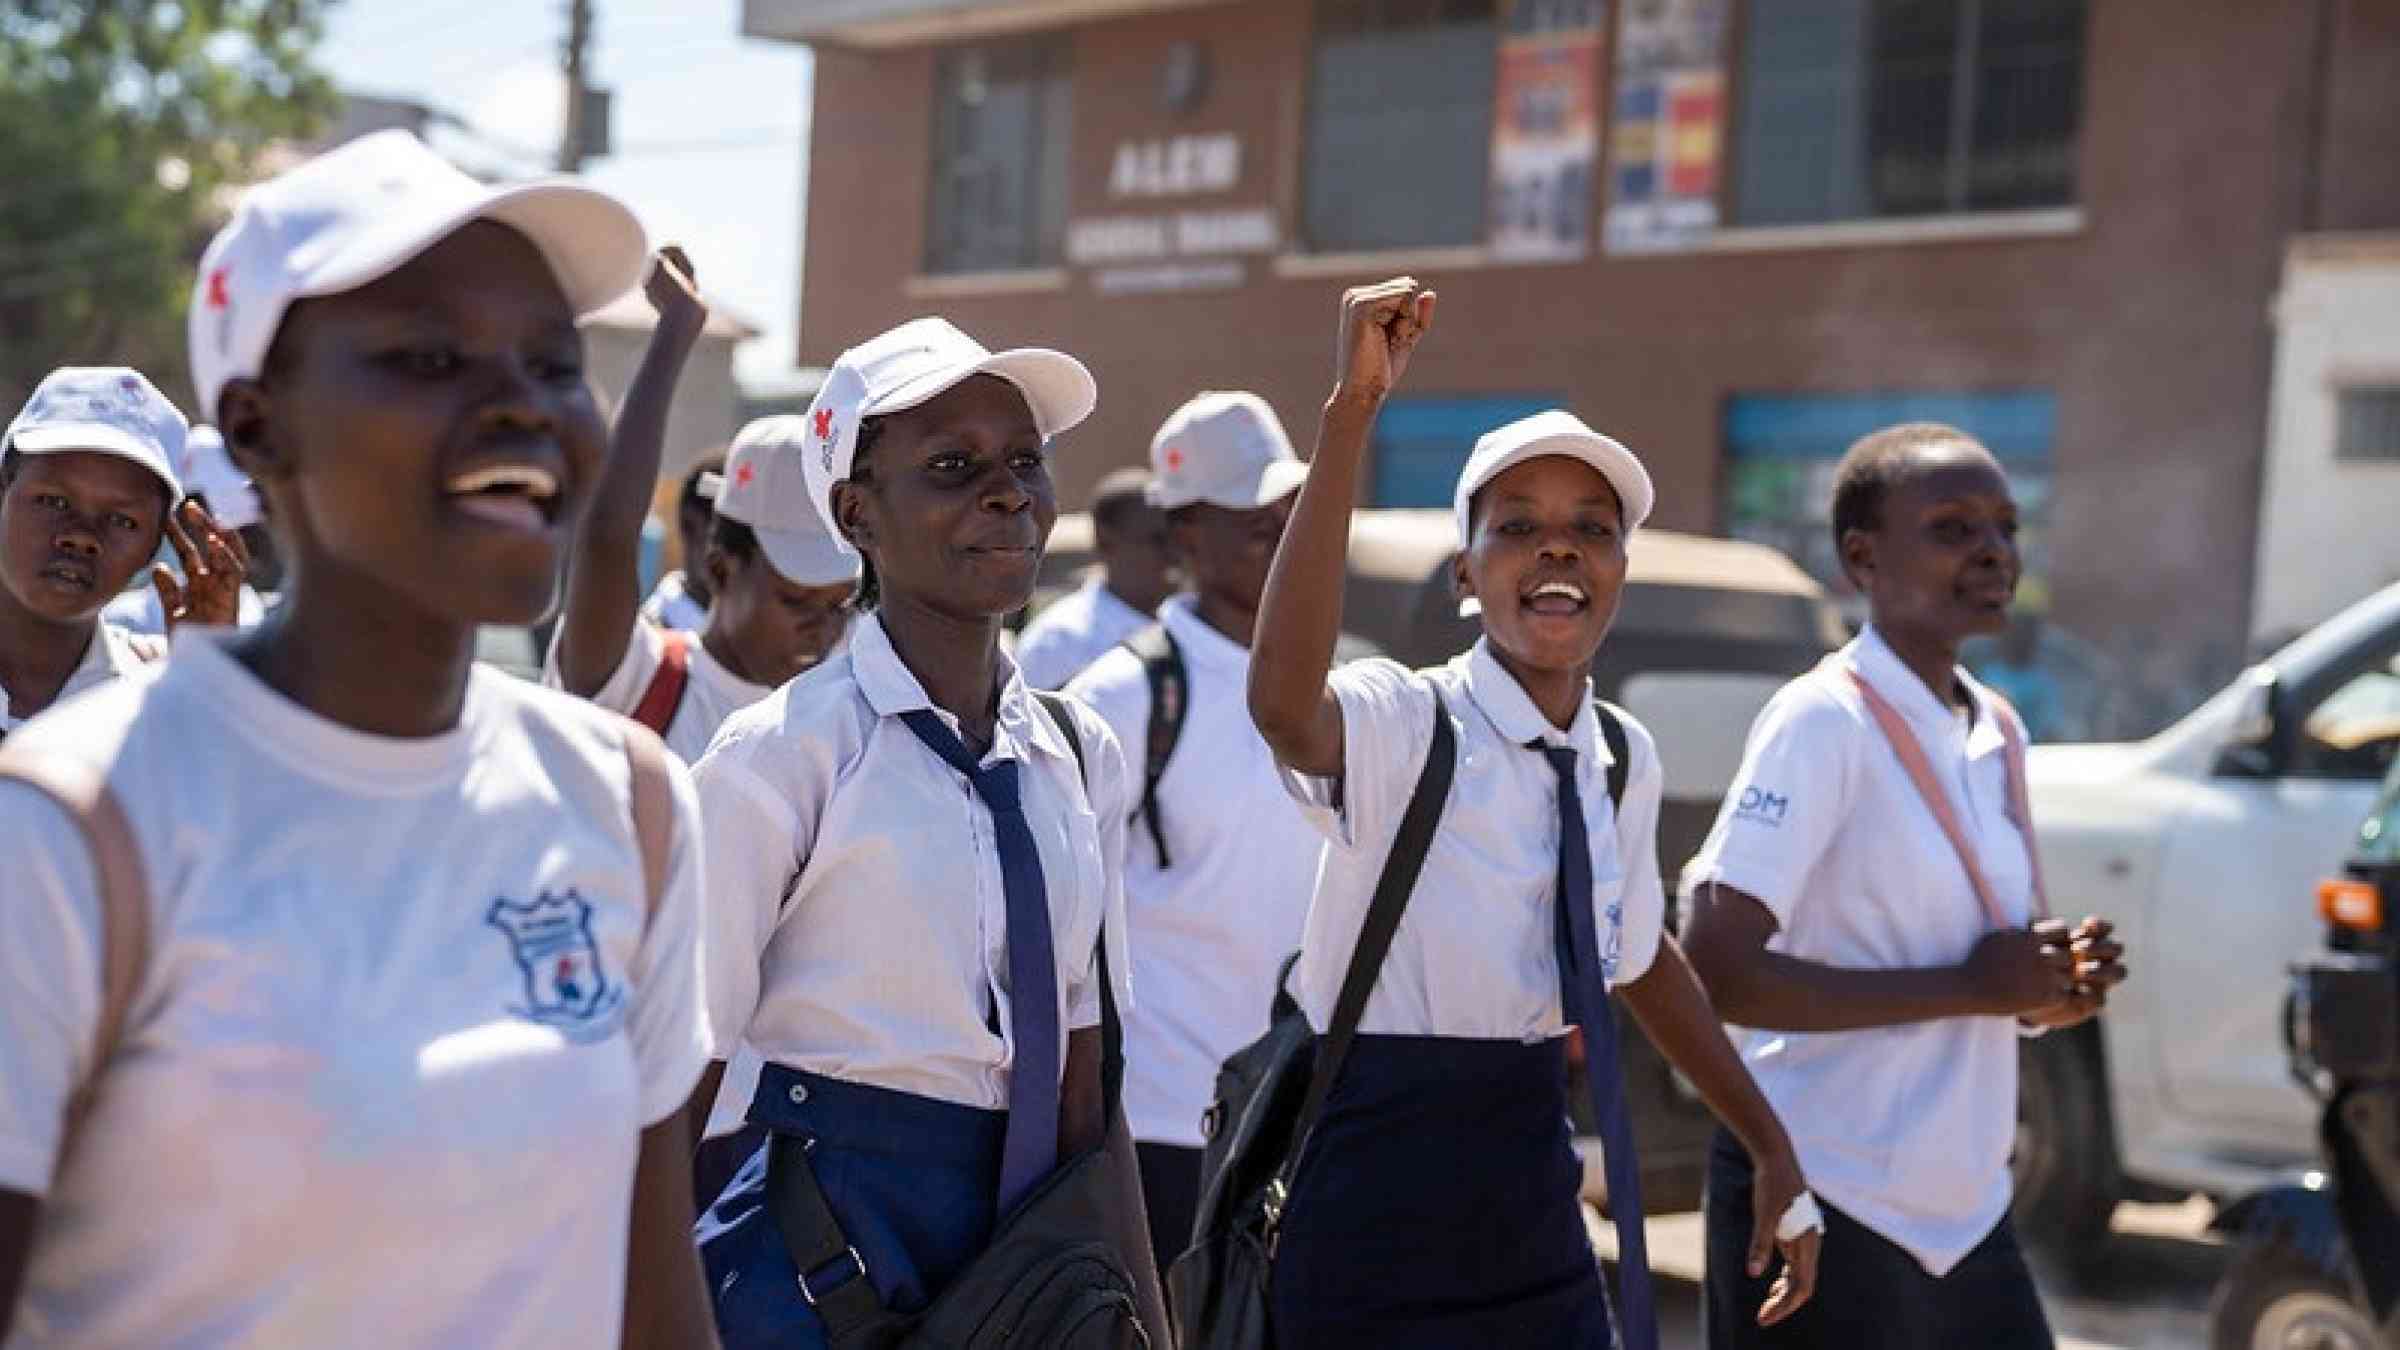 Young women take part in a march to raise awareness of disaster risk in Juba, South Sudan.